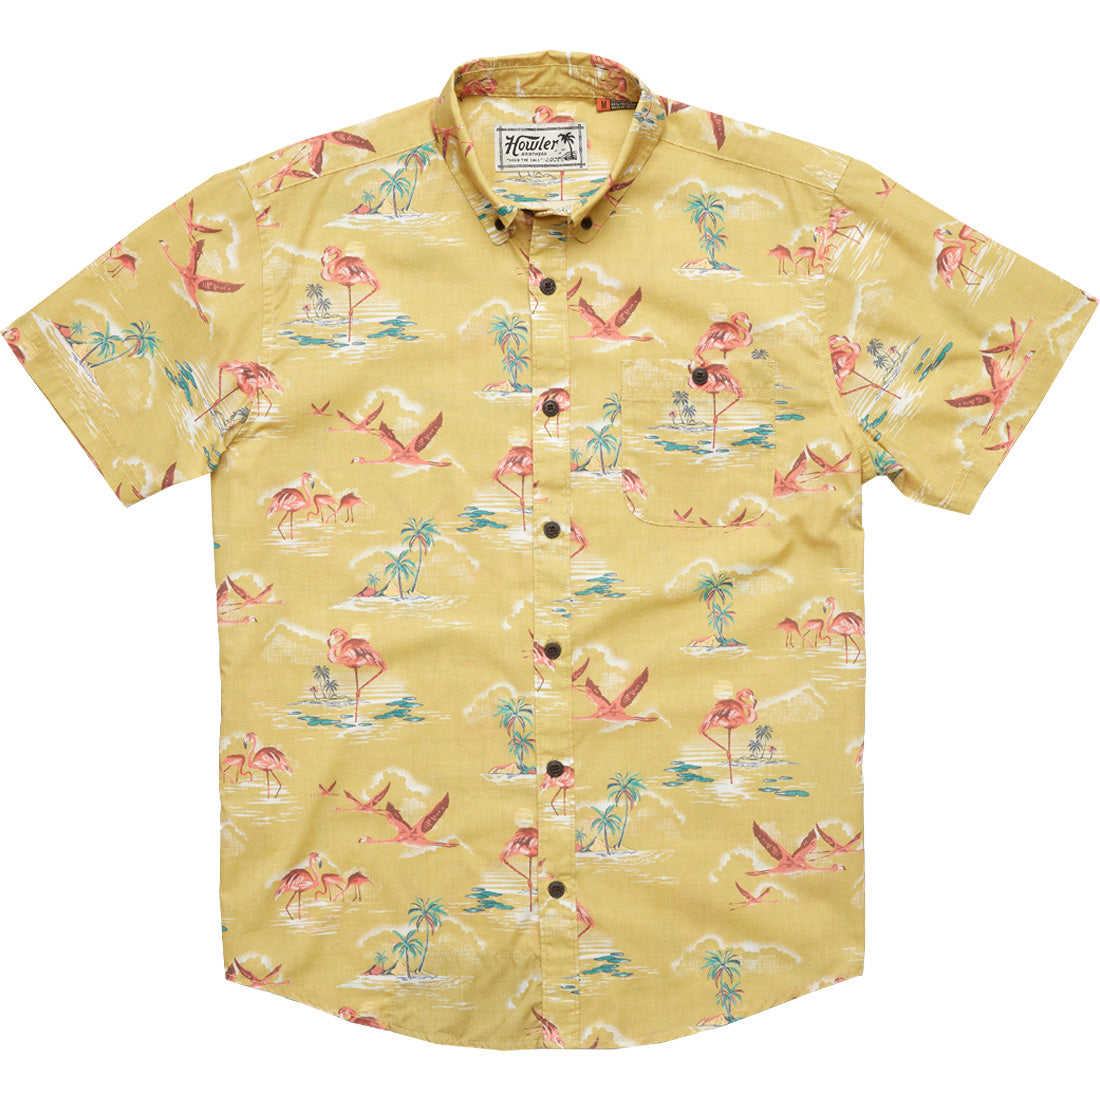 Howler Brothers Mansfield Shirt - Men's